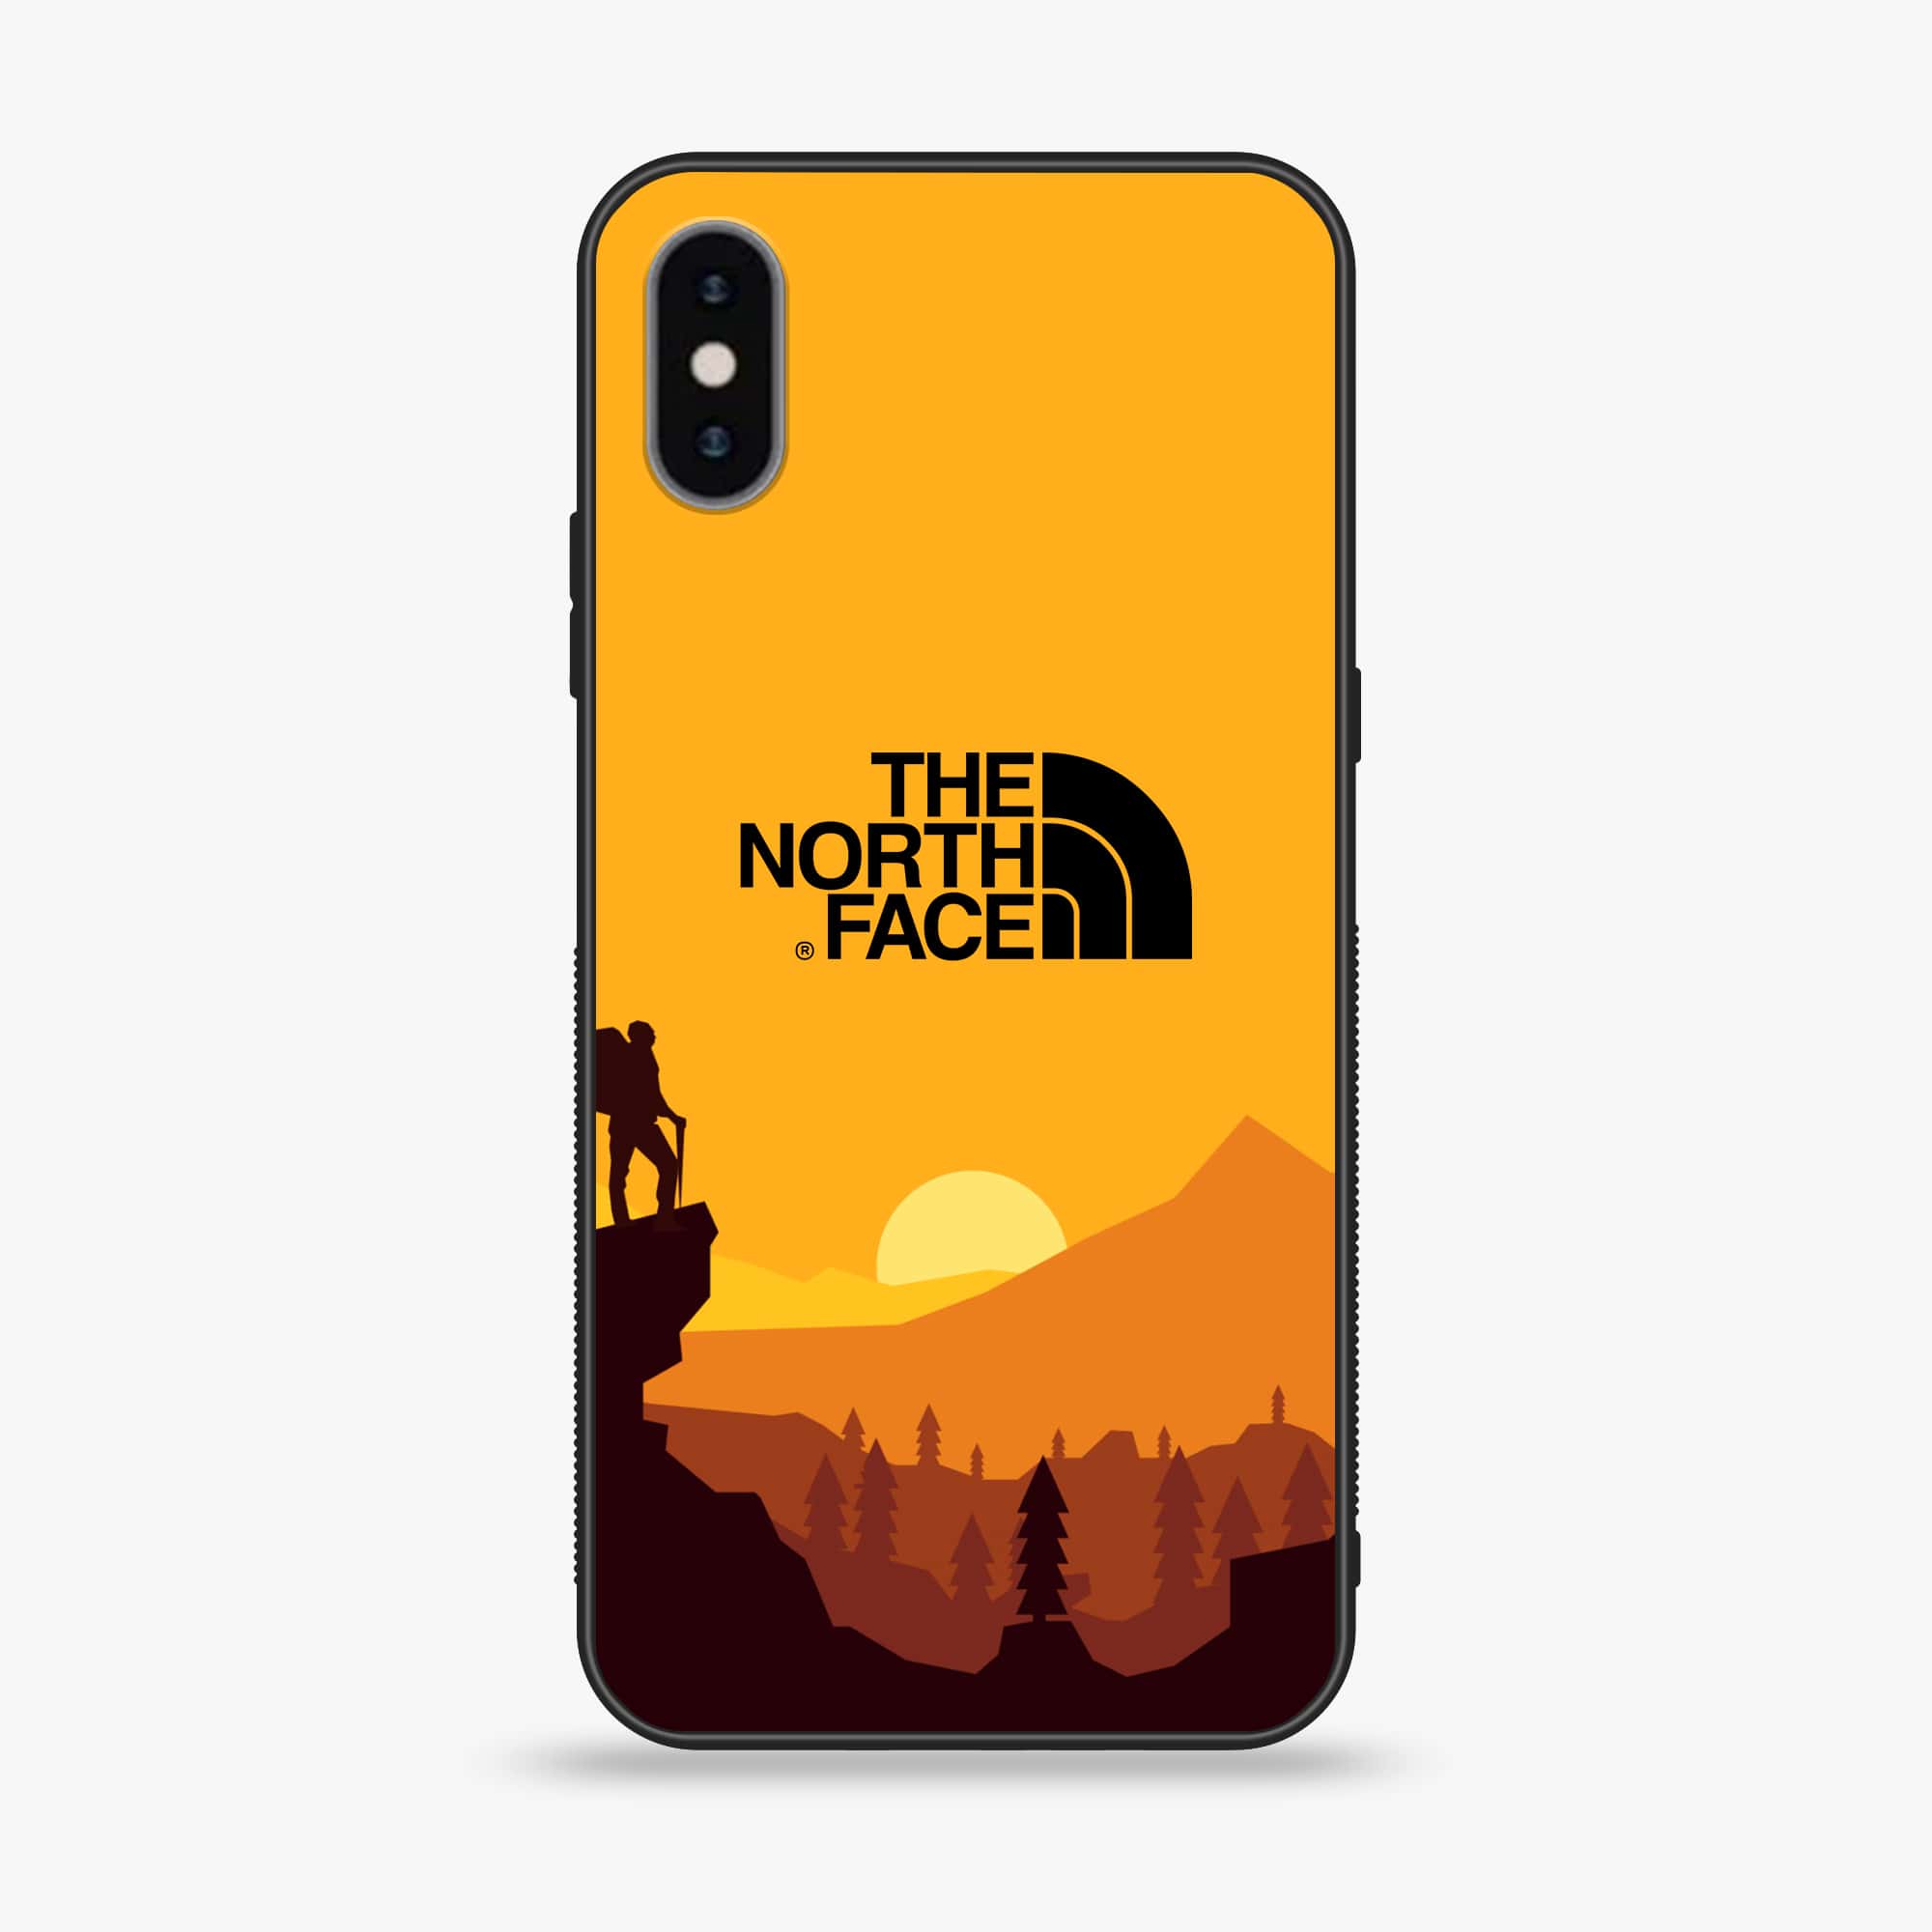 iPhone XS Max - The North Face Series - Premium Printed Glass soft Bumper shock Proof Case